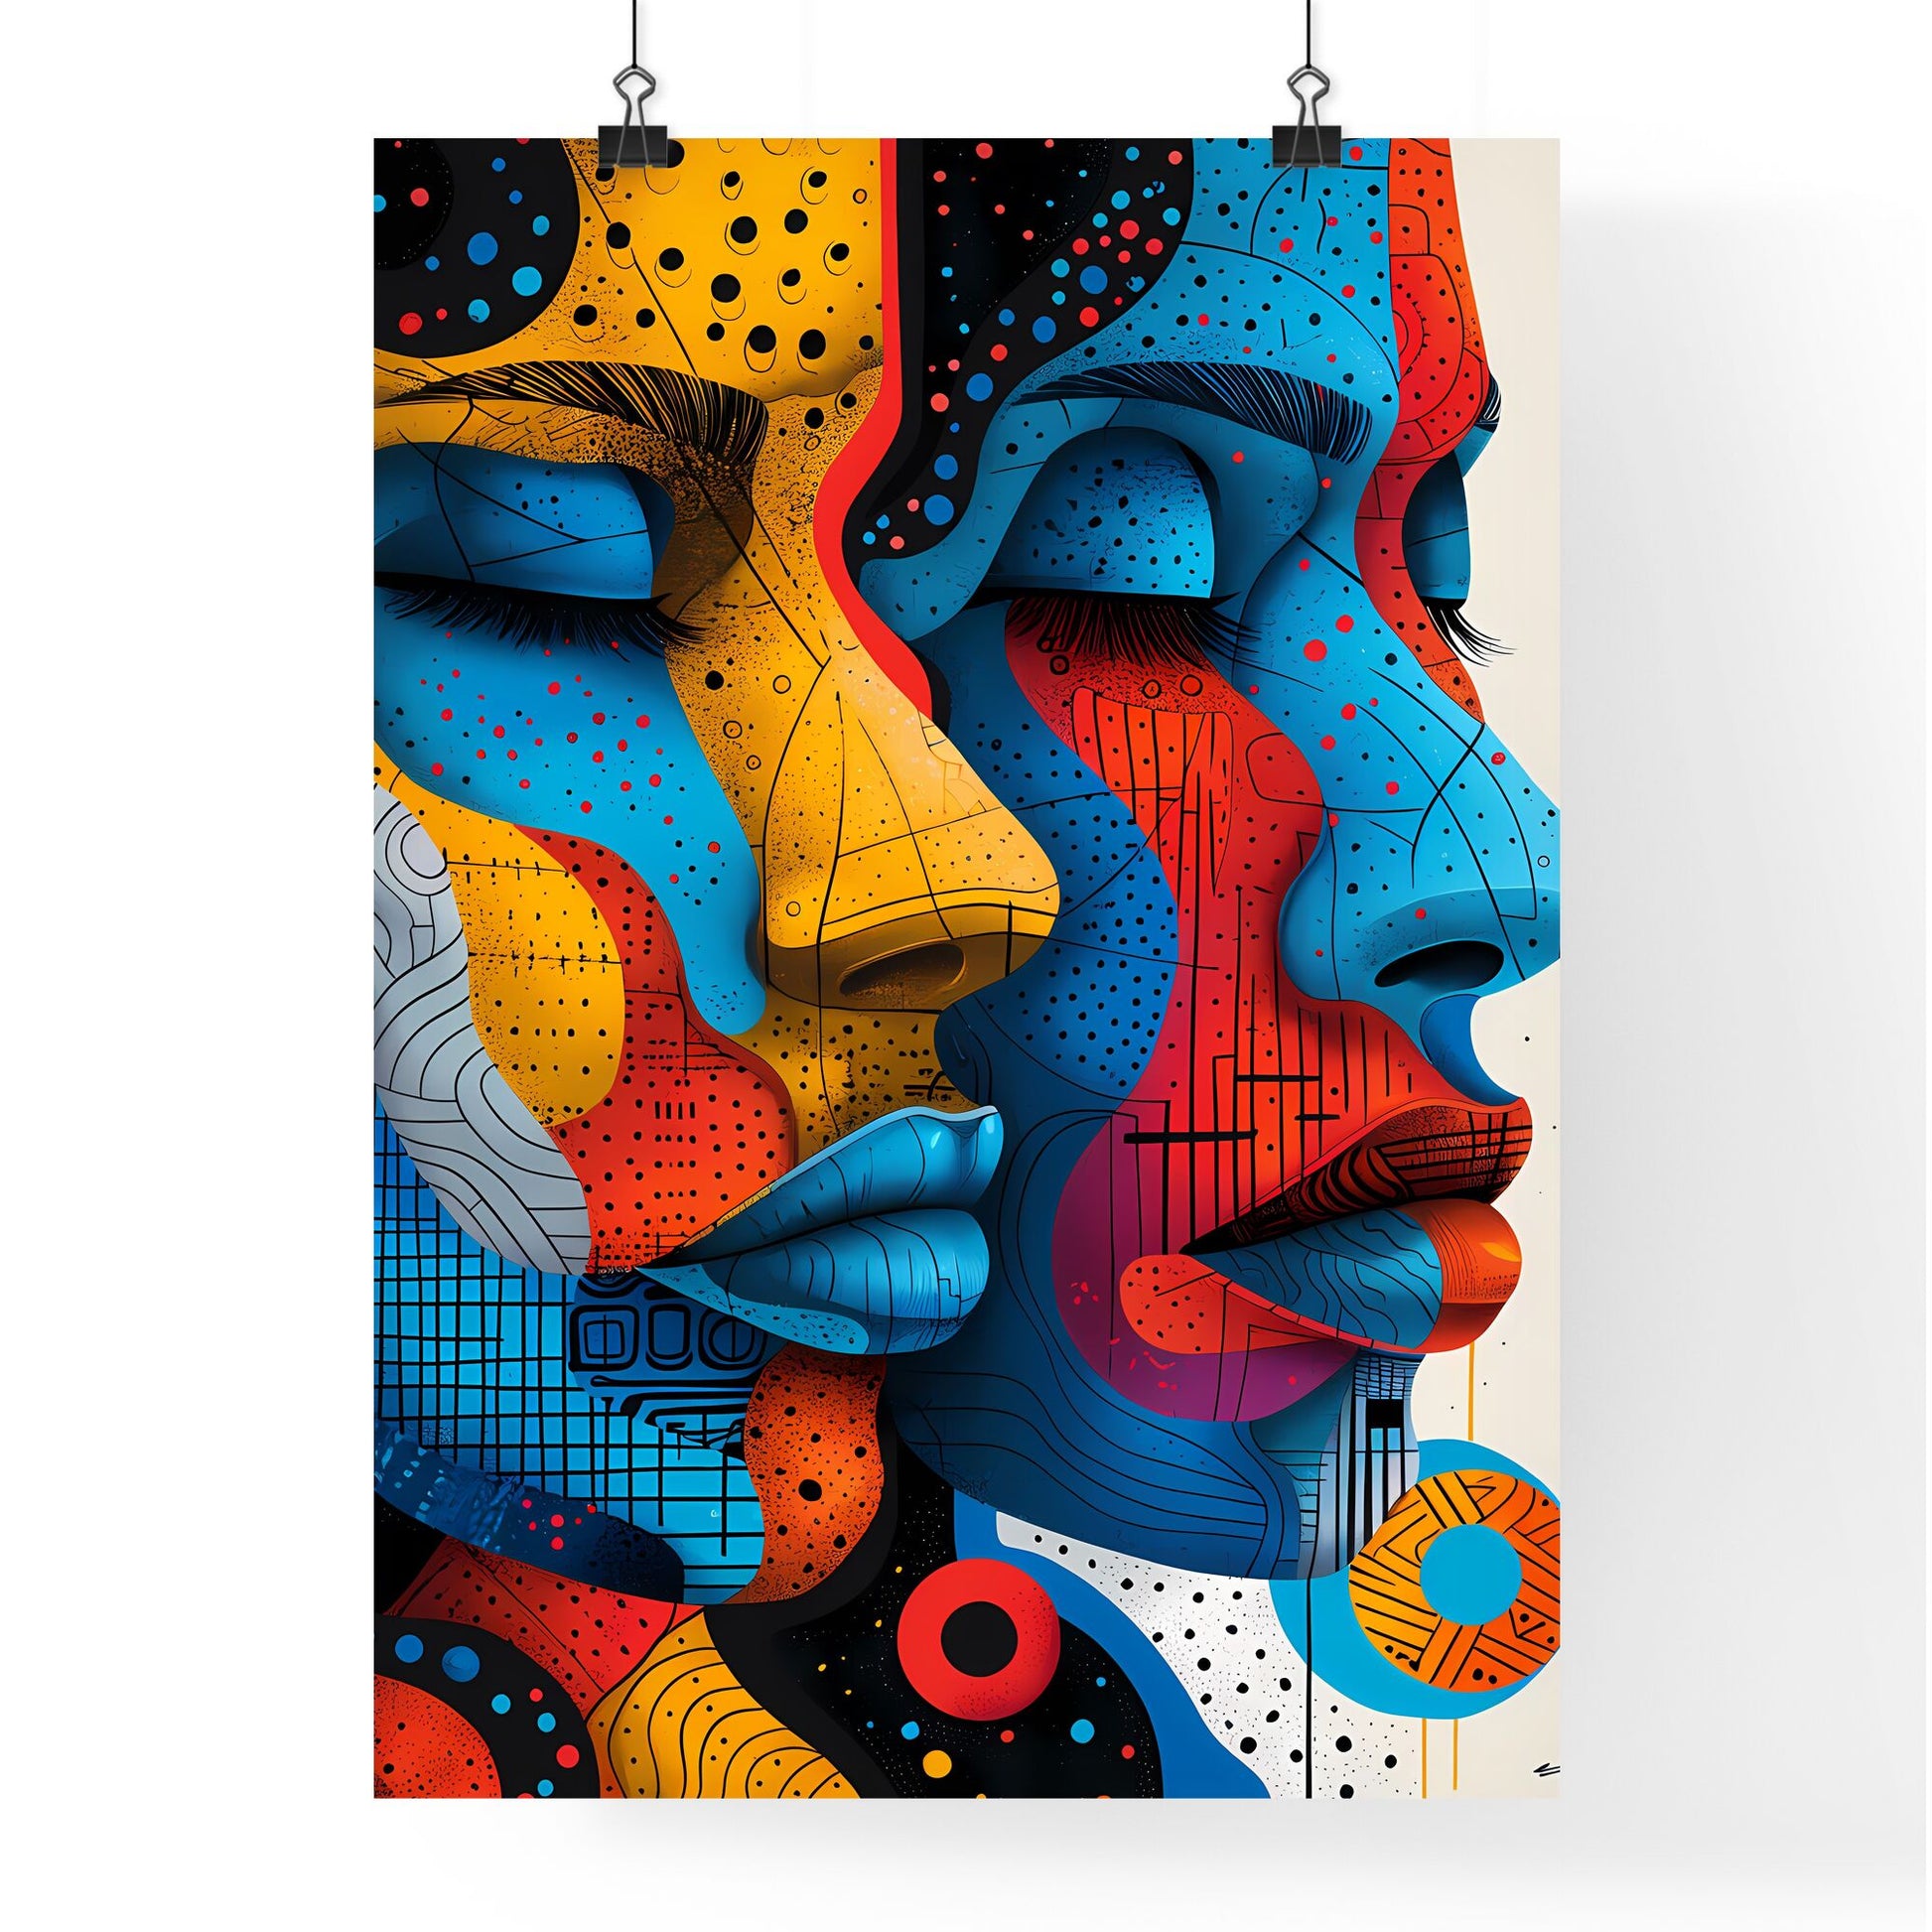 Abstract Art: Modern African Style with Patterns, Human Shapes, and Urban Vibes in Vibrant Pastel Colors - A Captivating Painting Image! Default Title